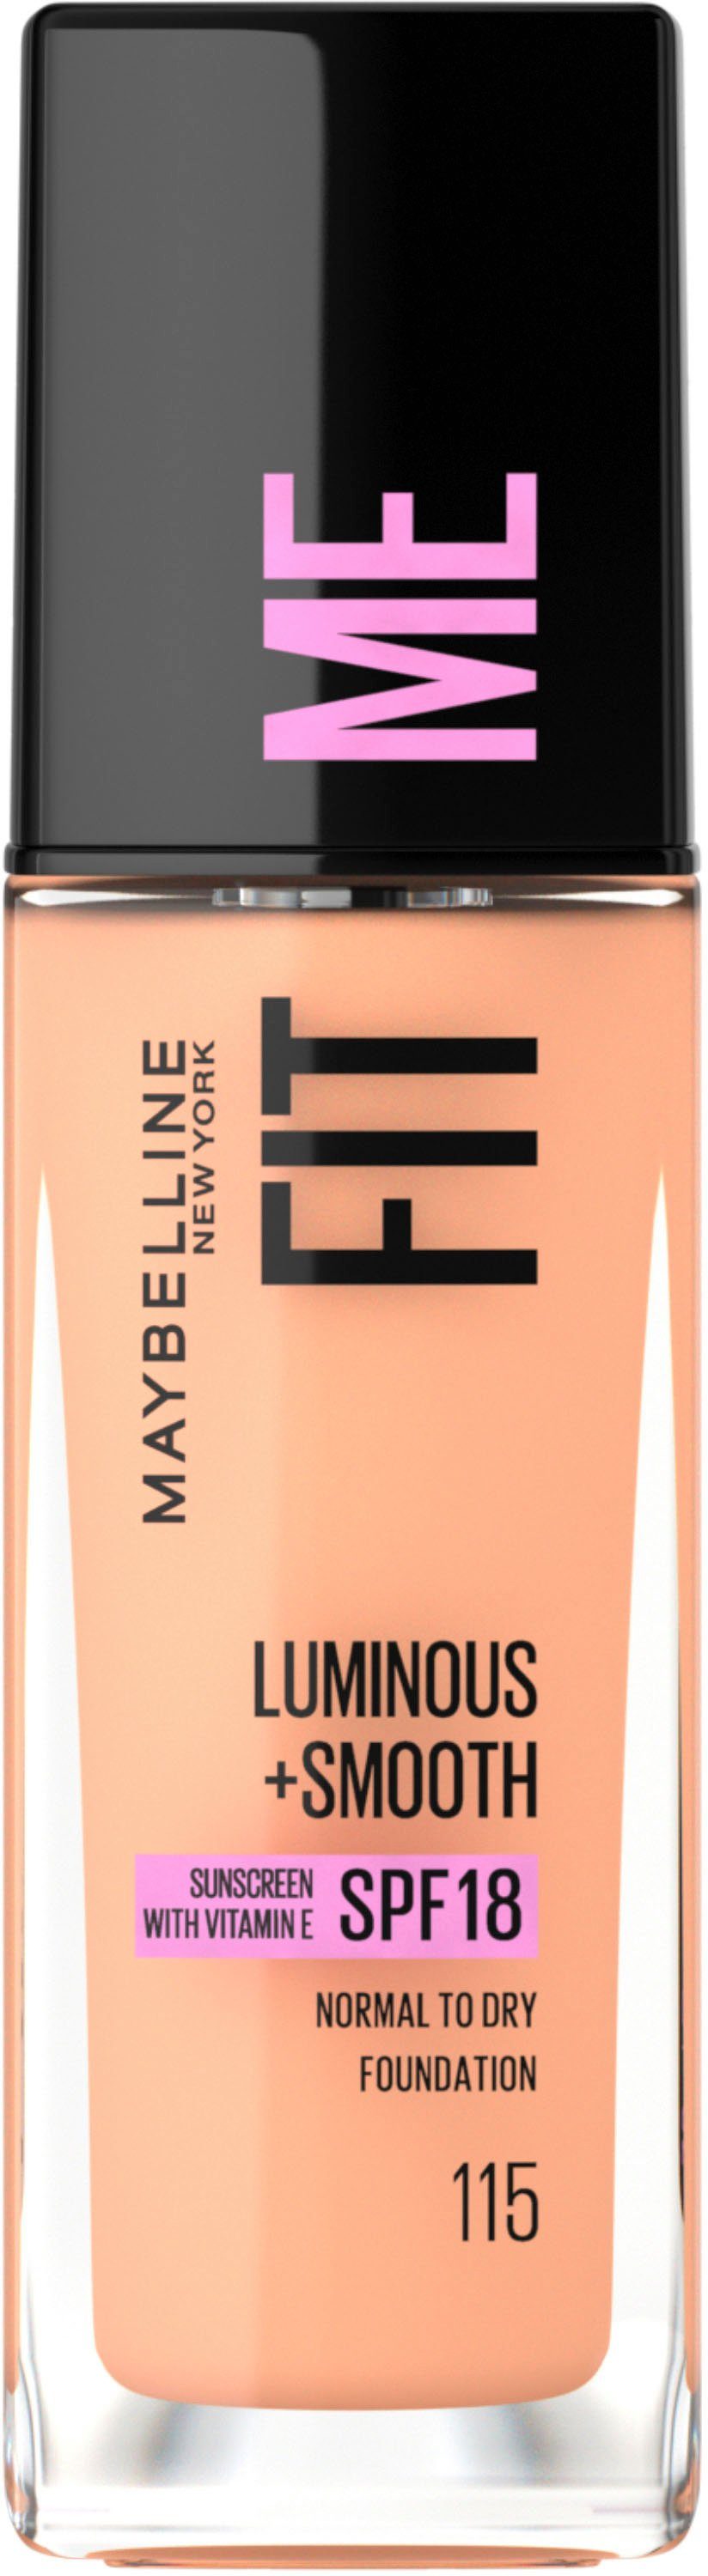 MAYBELLINE NEW YORK Foundation Fit Me! Liquid Make-Up